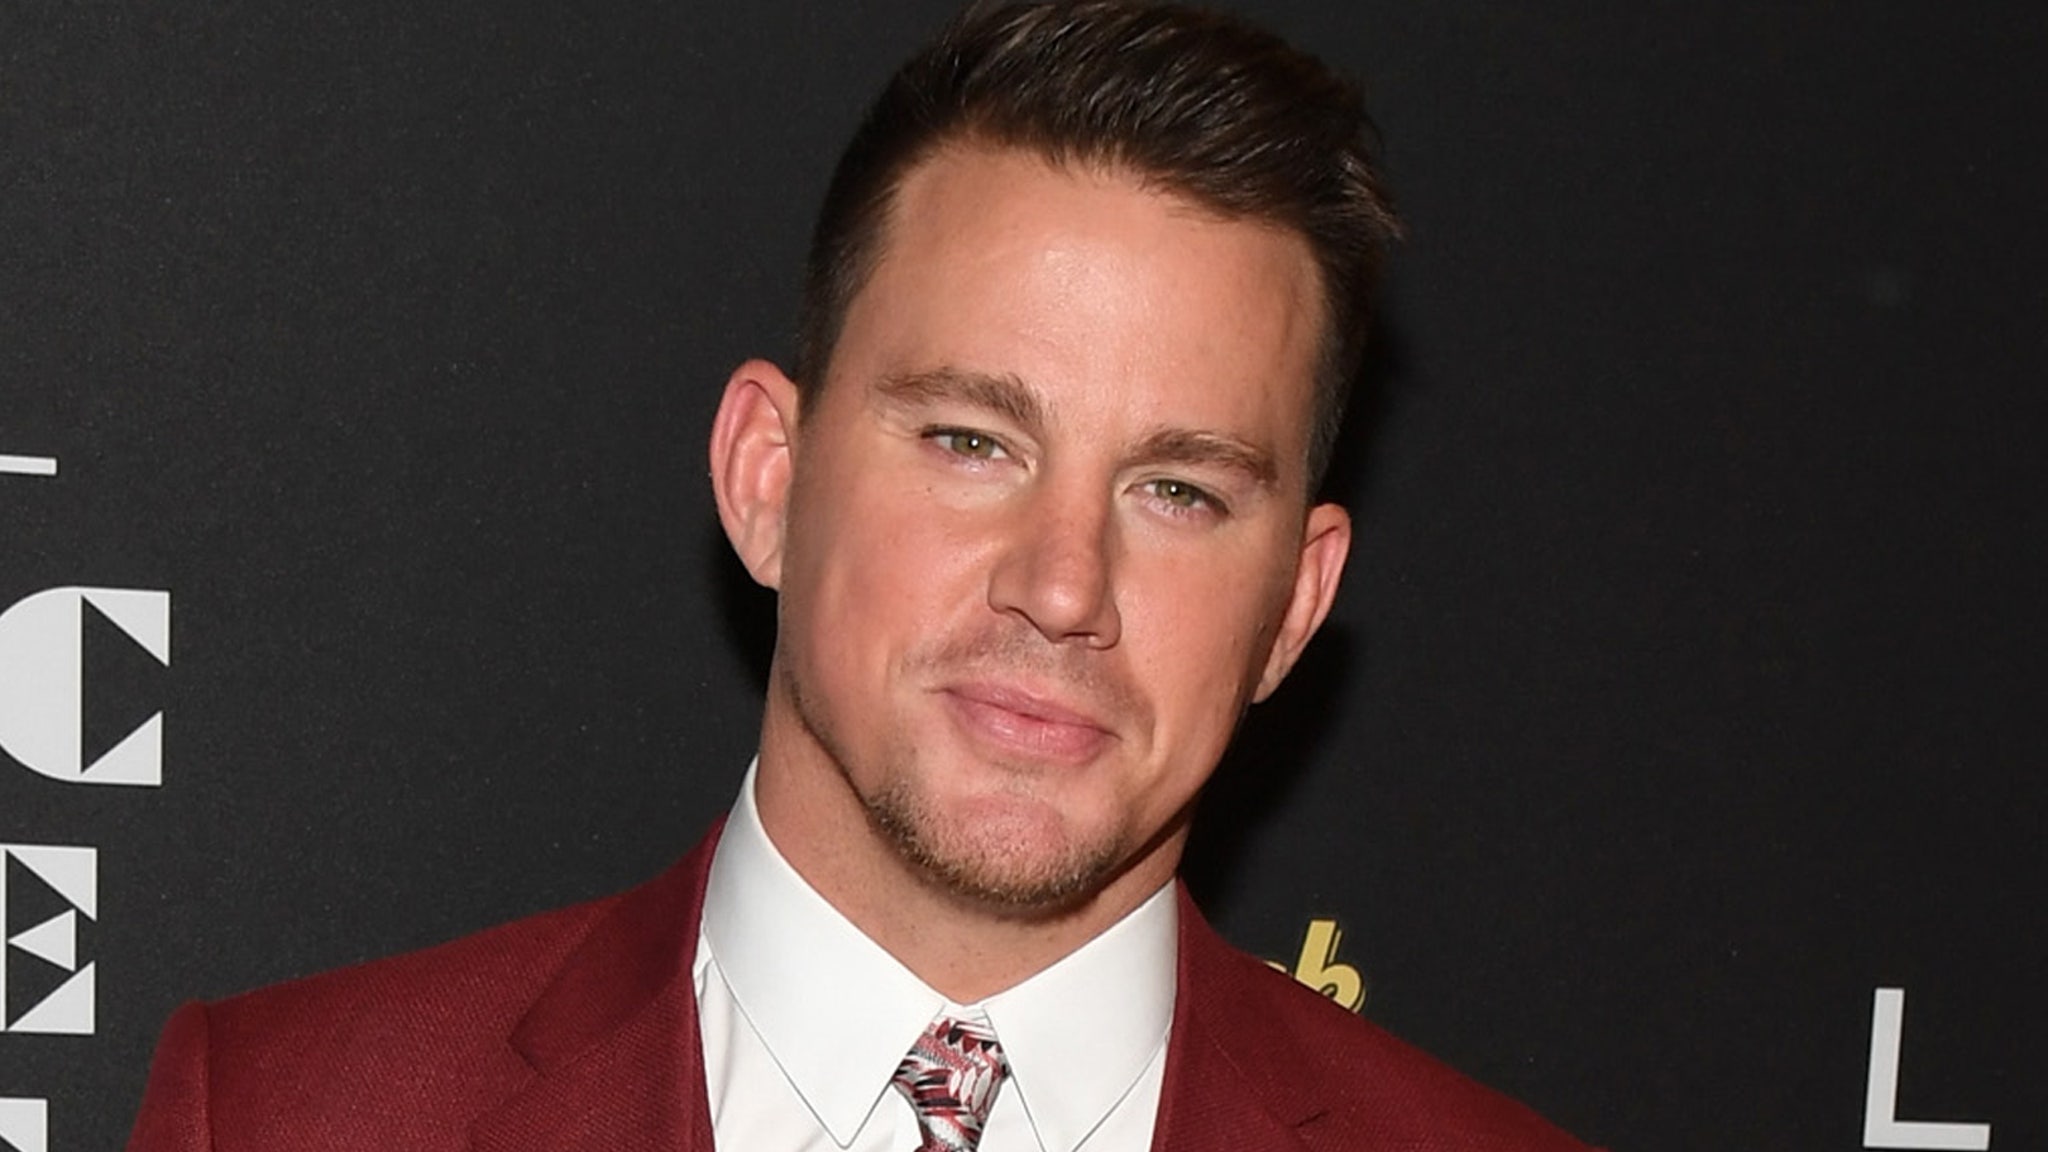 Channing Tatum Takes on Matters of Love, Men and Sex for His Daughter in Po...